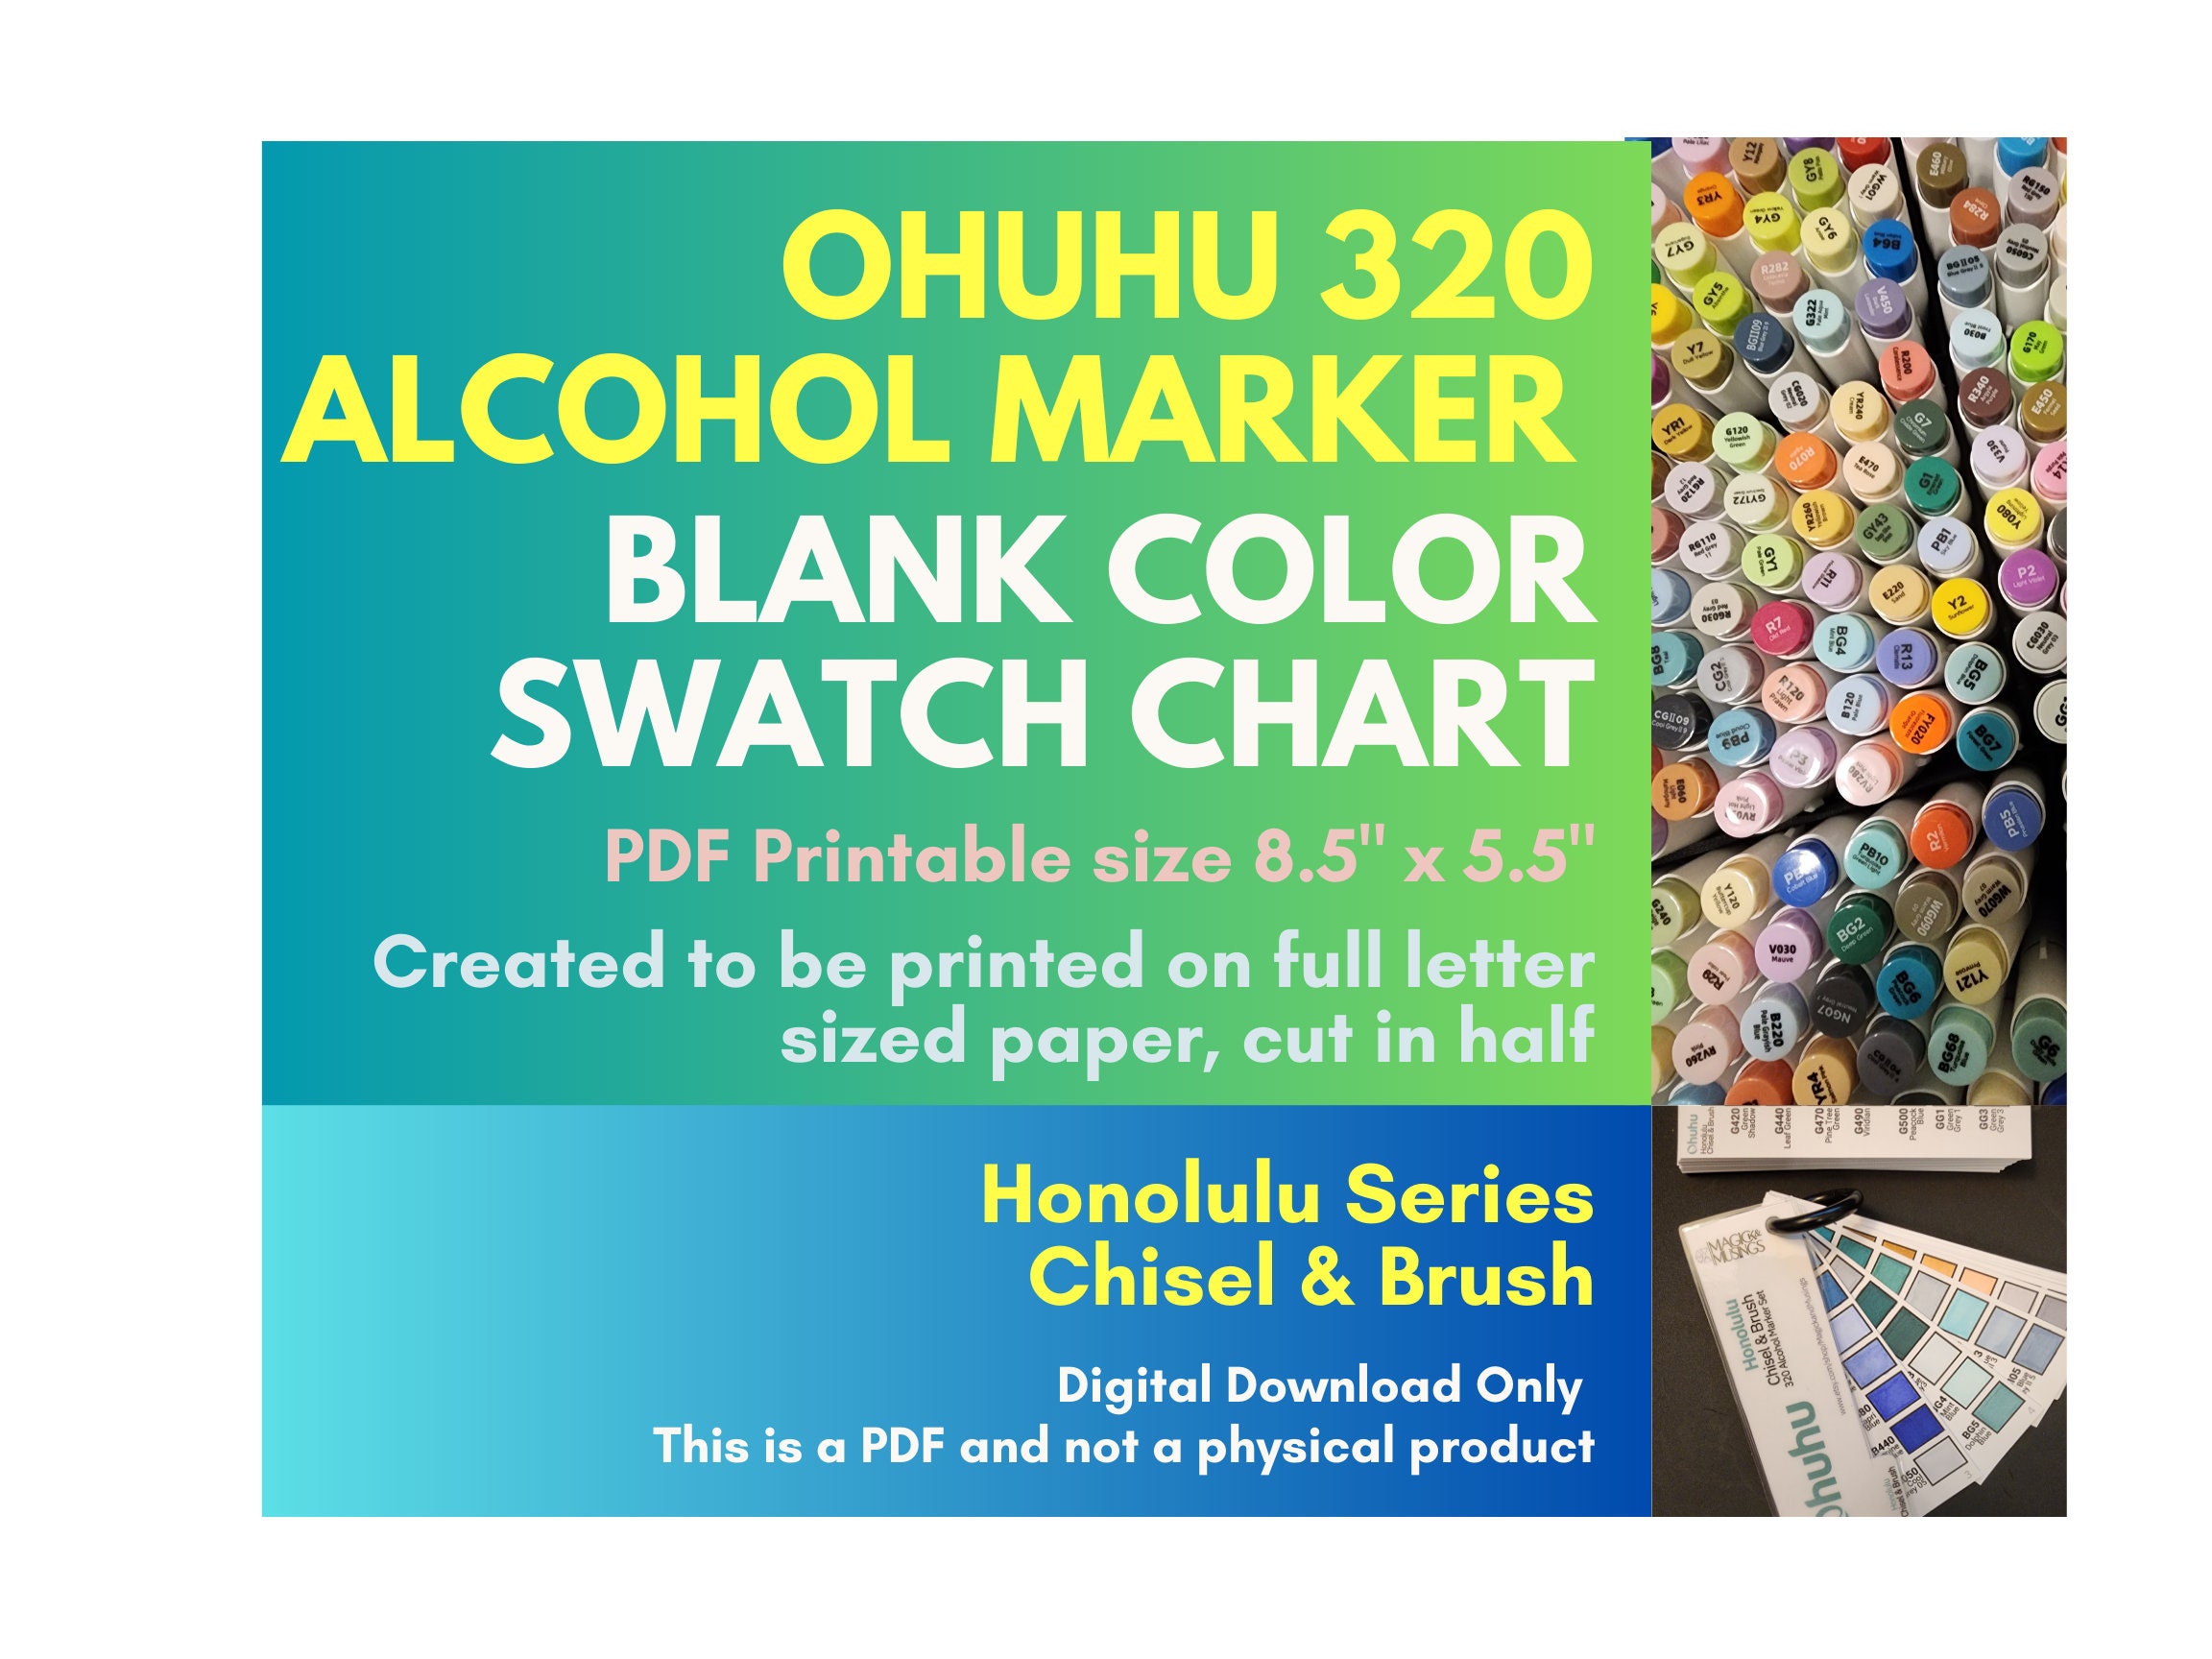 Swatch Form: Ohuhu Chisel & Fine Markers oahu Series 2022 Final